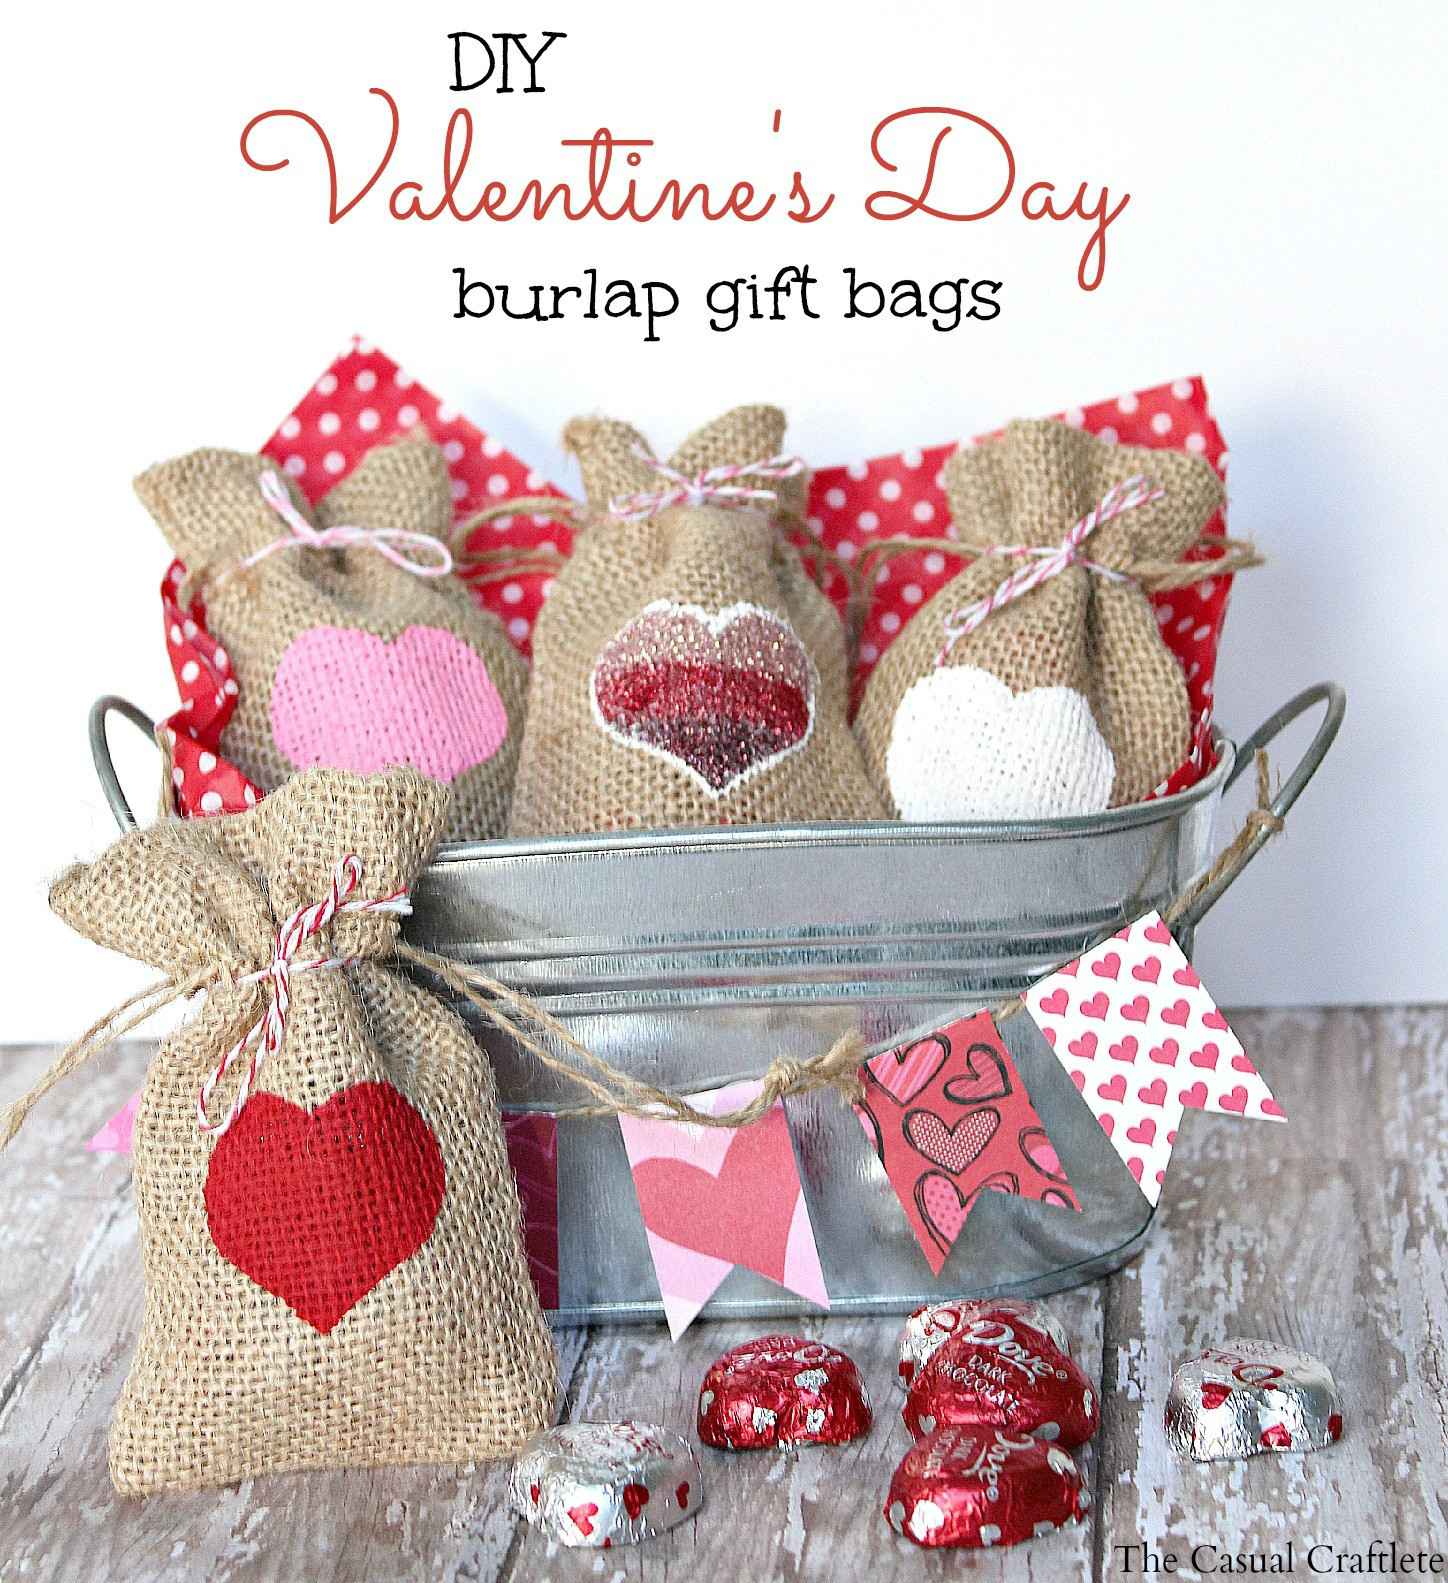 Valentines Day Diy Gift Best Of Diy Valentine S Day Burlap Gift Bags